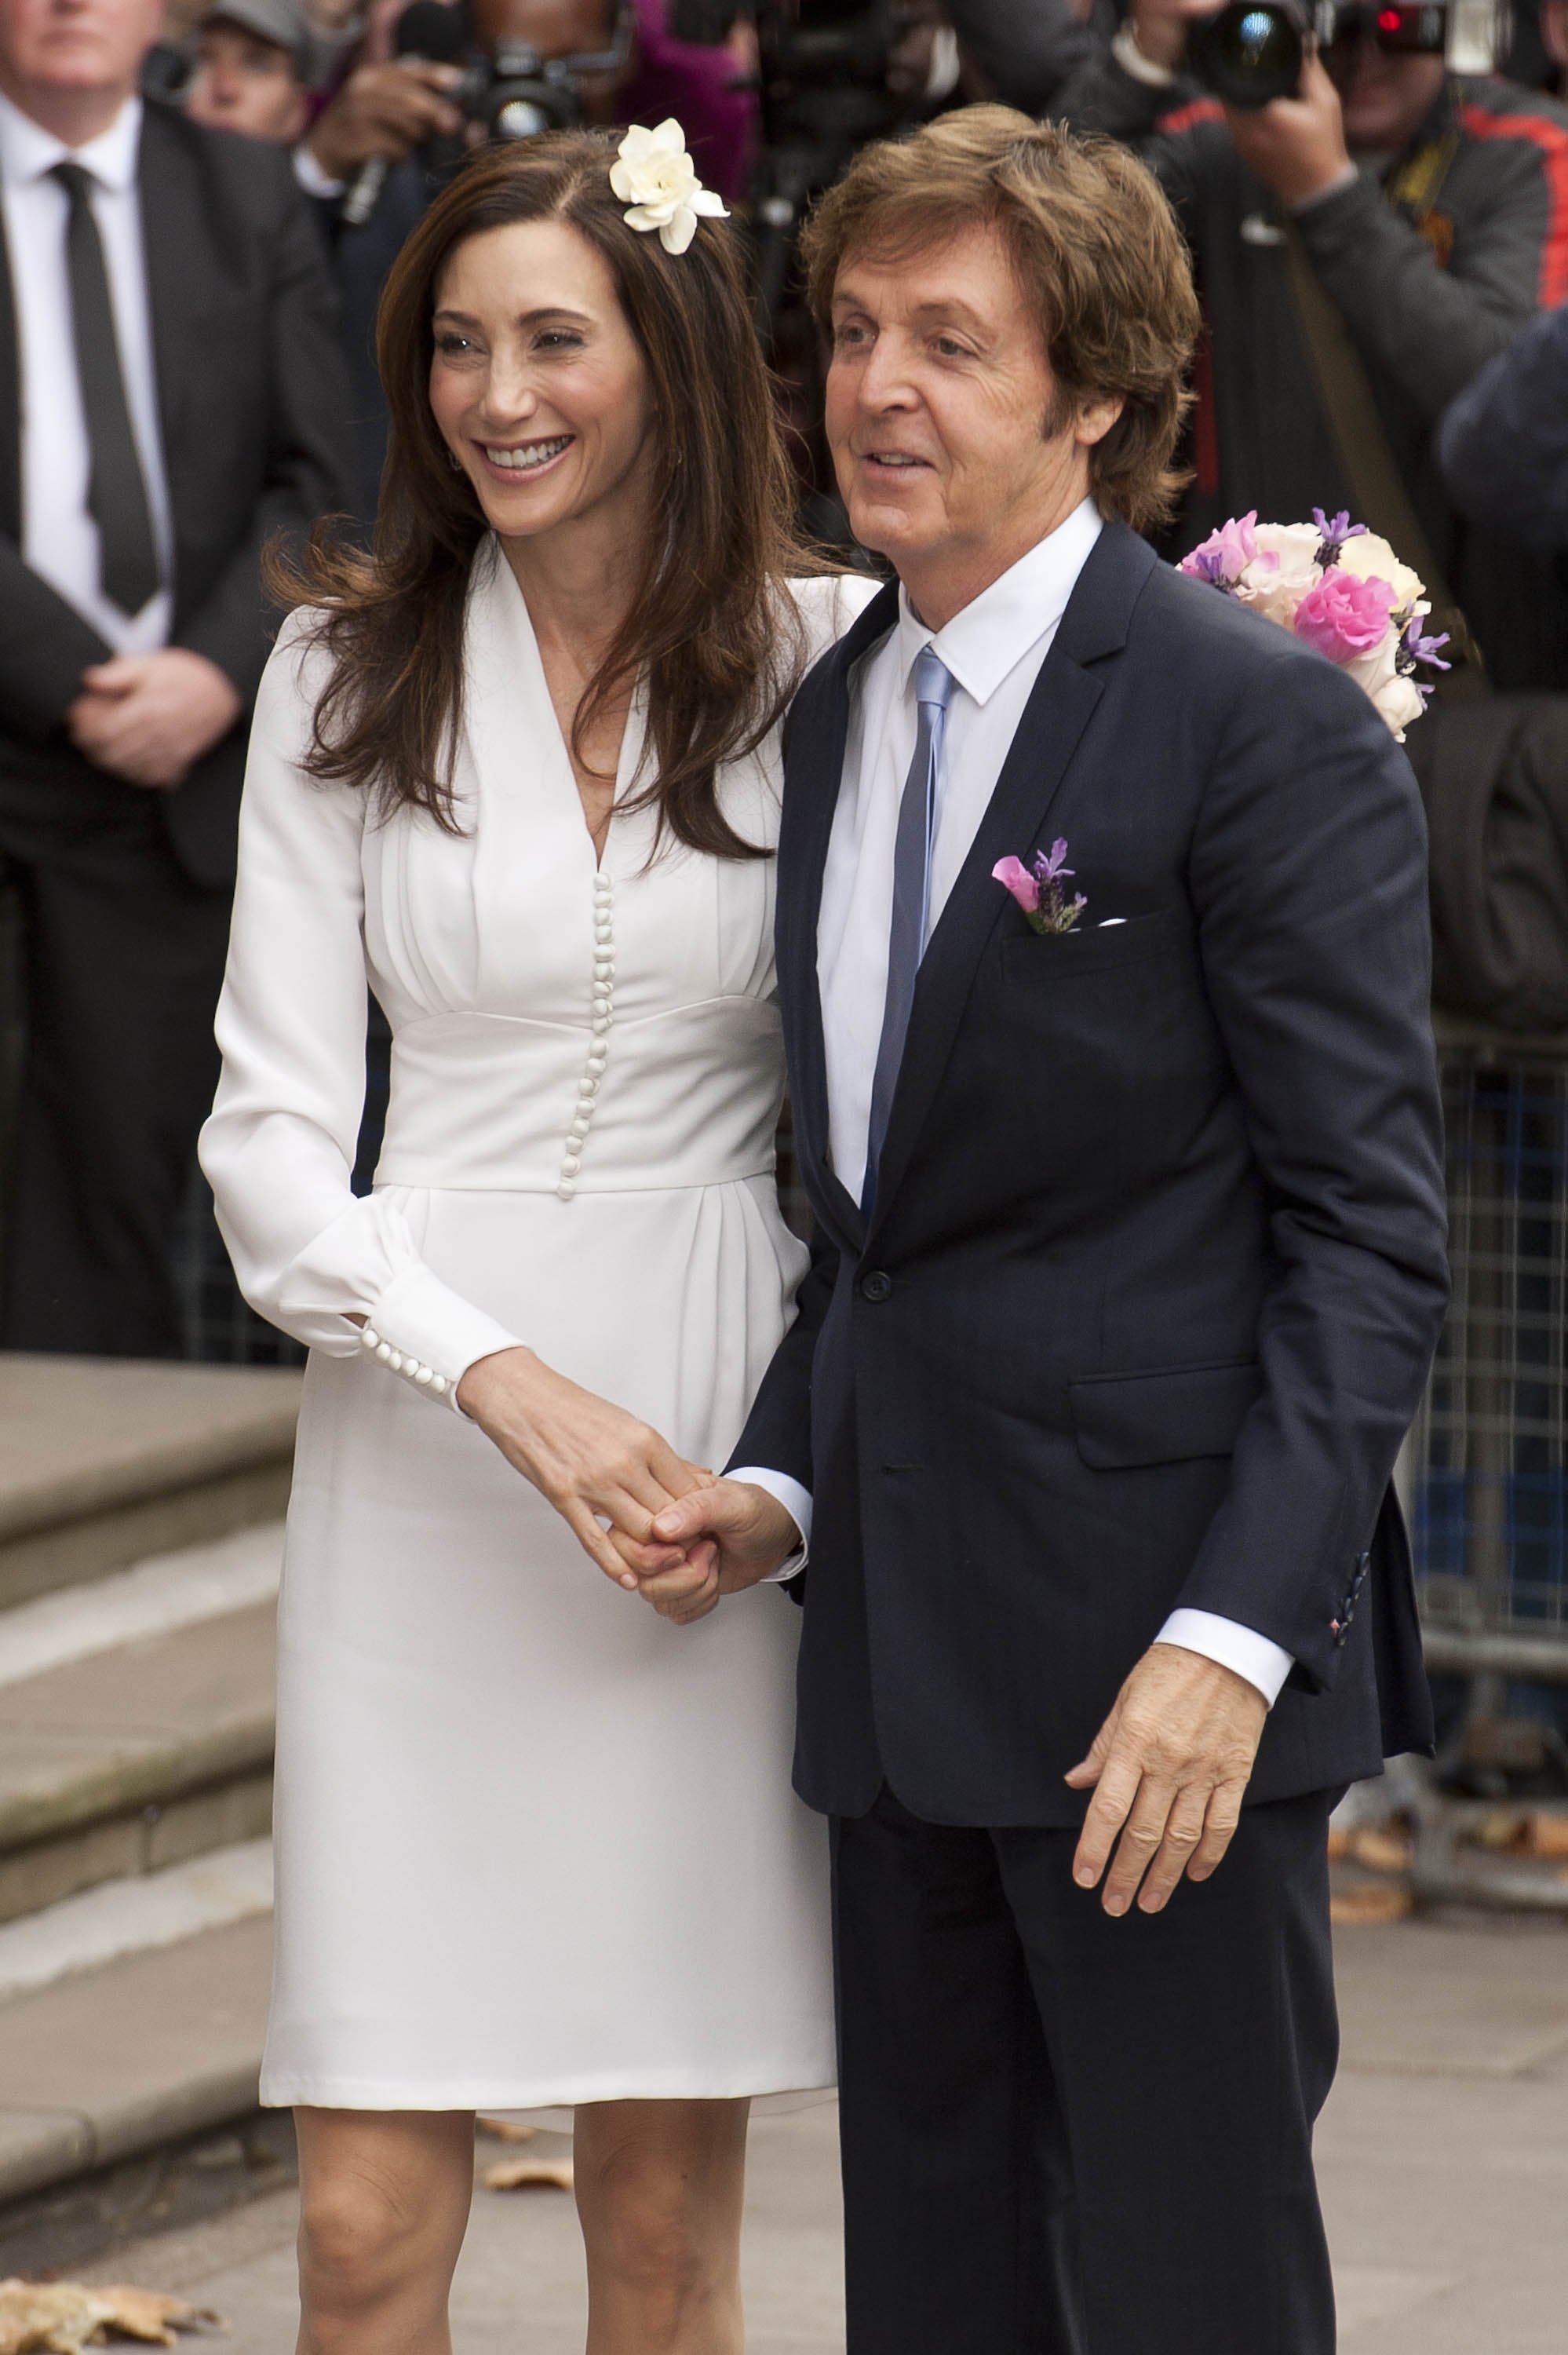 Nancy Shevell and Paul McCartney at the Marylebone Registry Office for their civil ceremony marriage on October 9, 2011, in London, England | Source: Getty Images